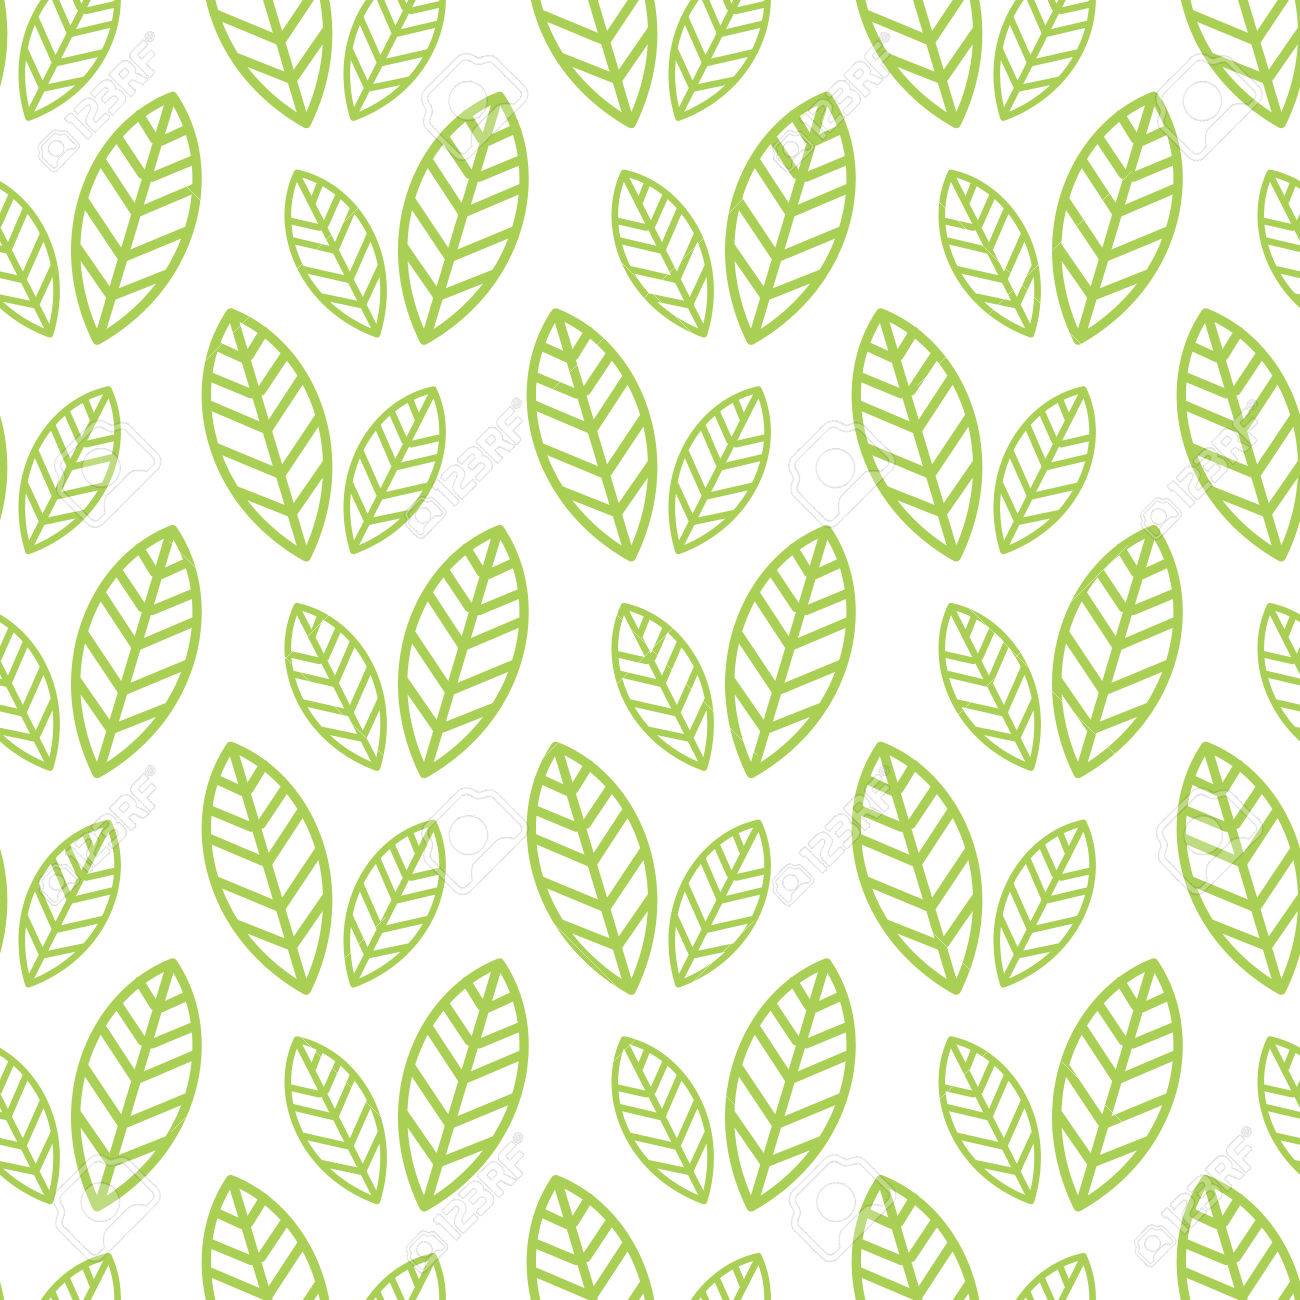 Simple Seamless Organic Wallpaper With A Pattern Of Green Leaves